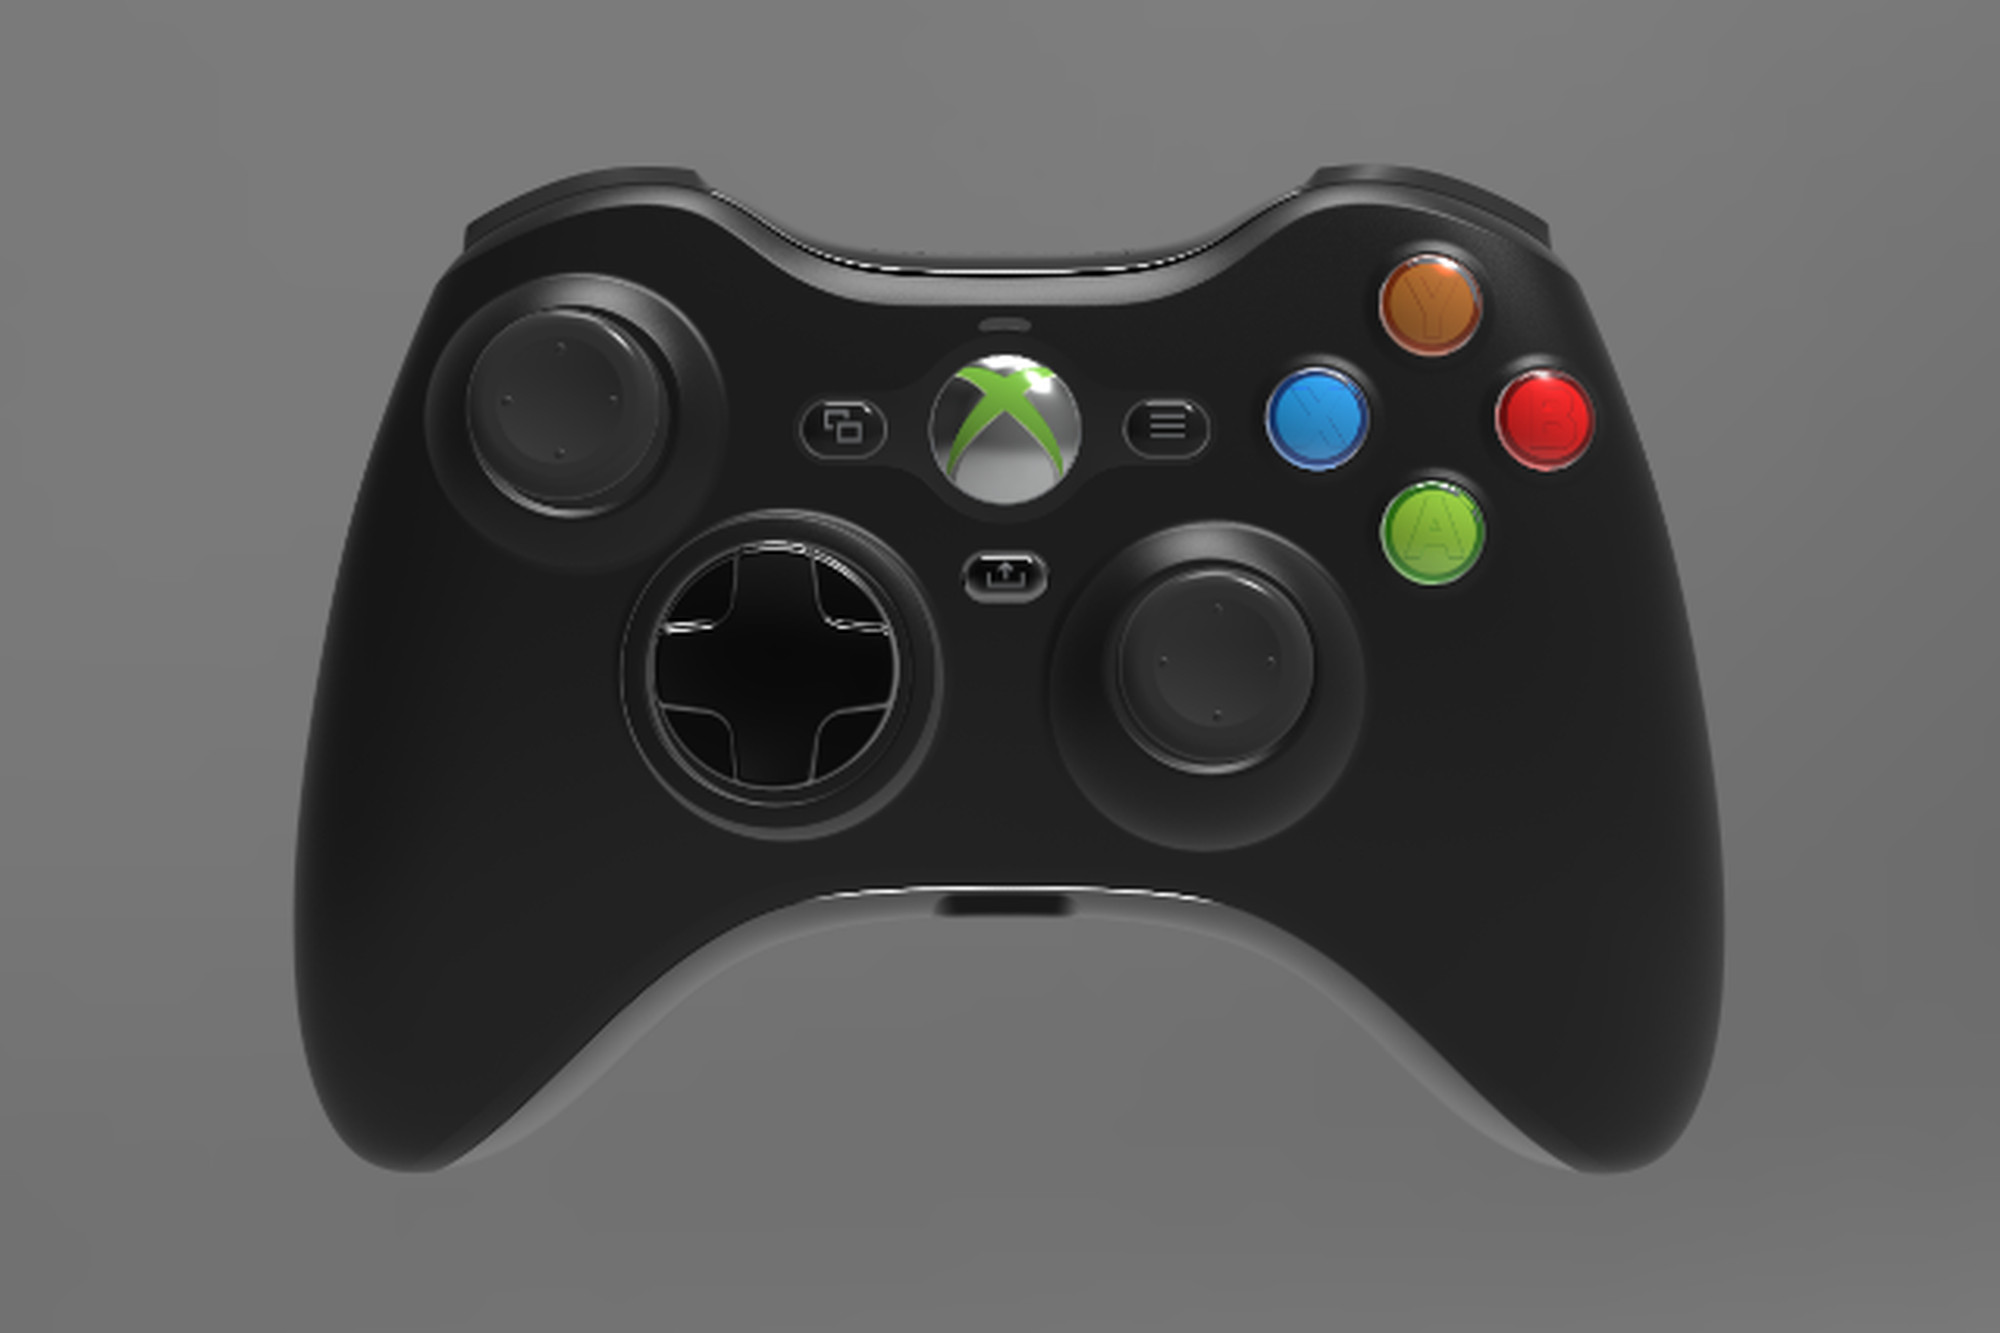 Hyperkin's Xbox 360 controller will start selling in June for $49.99